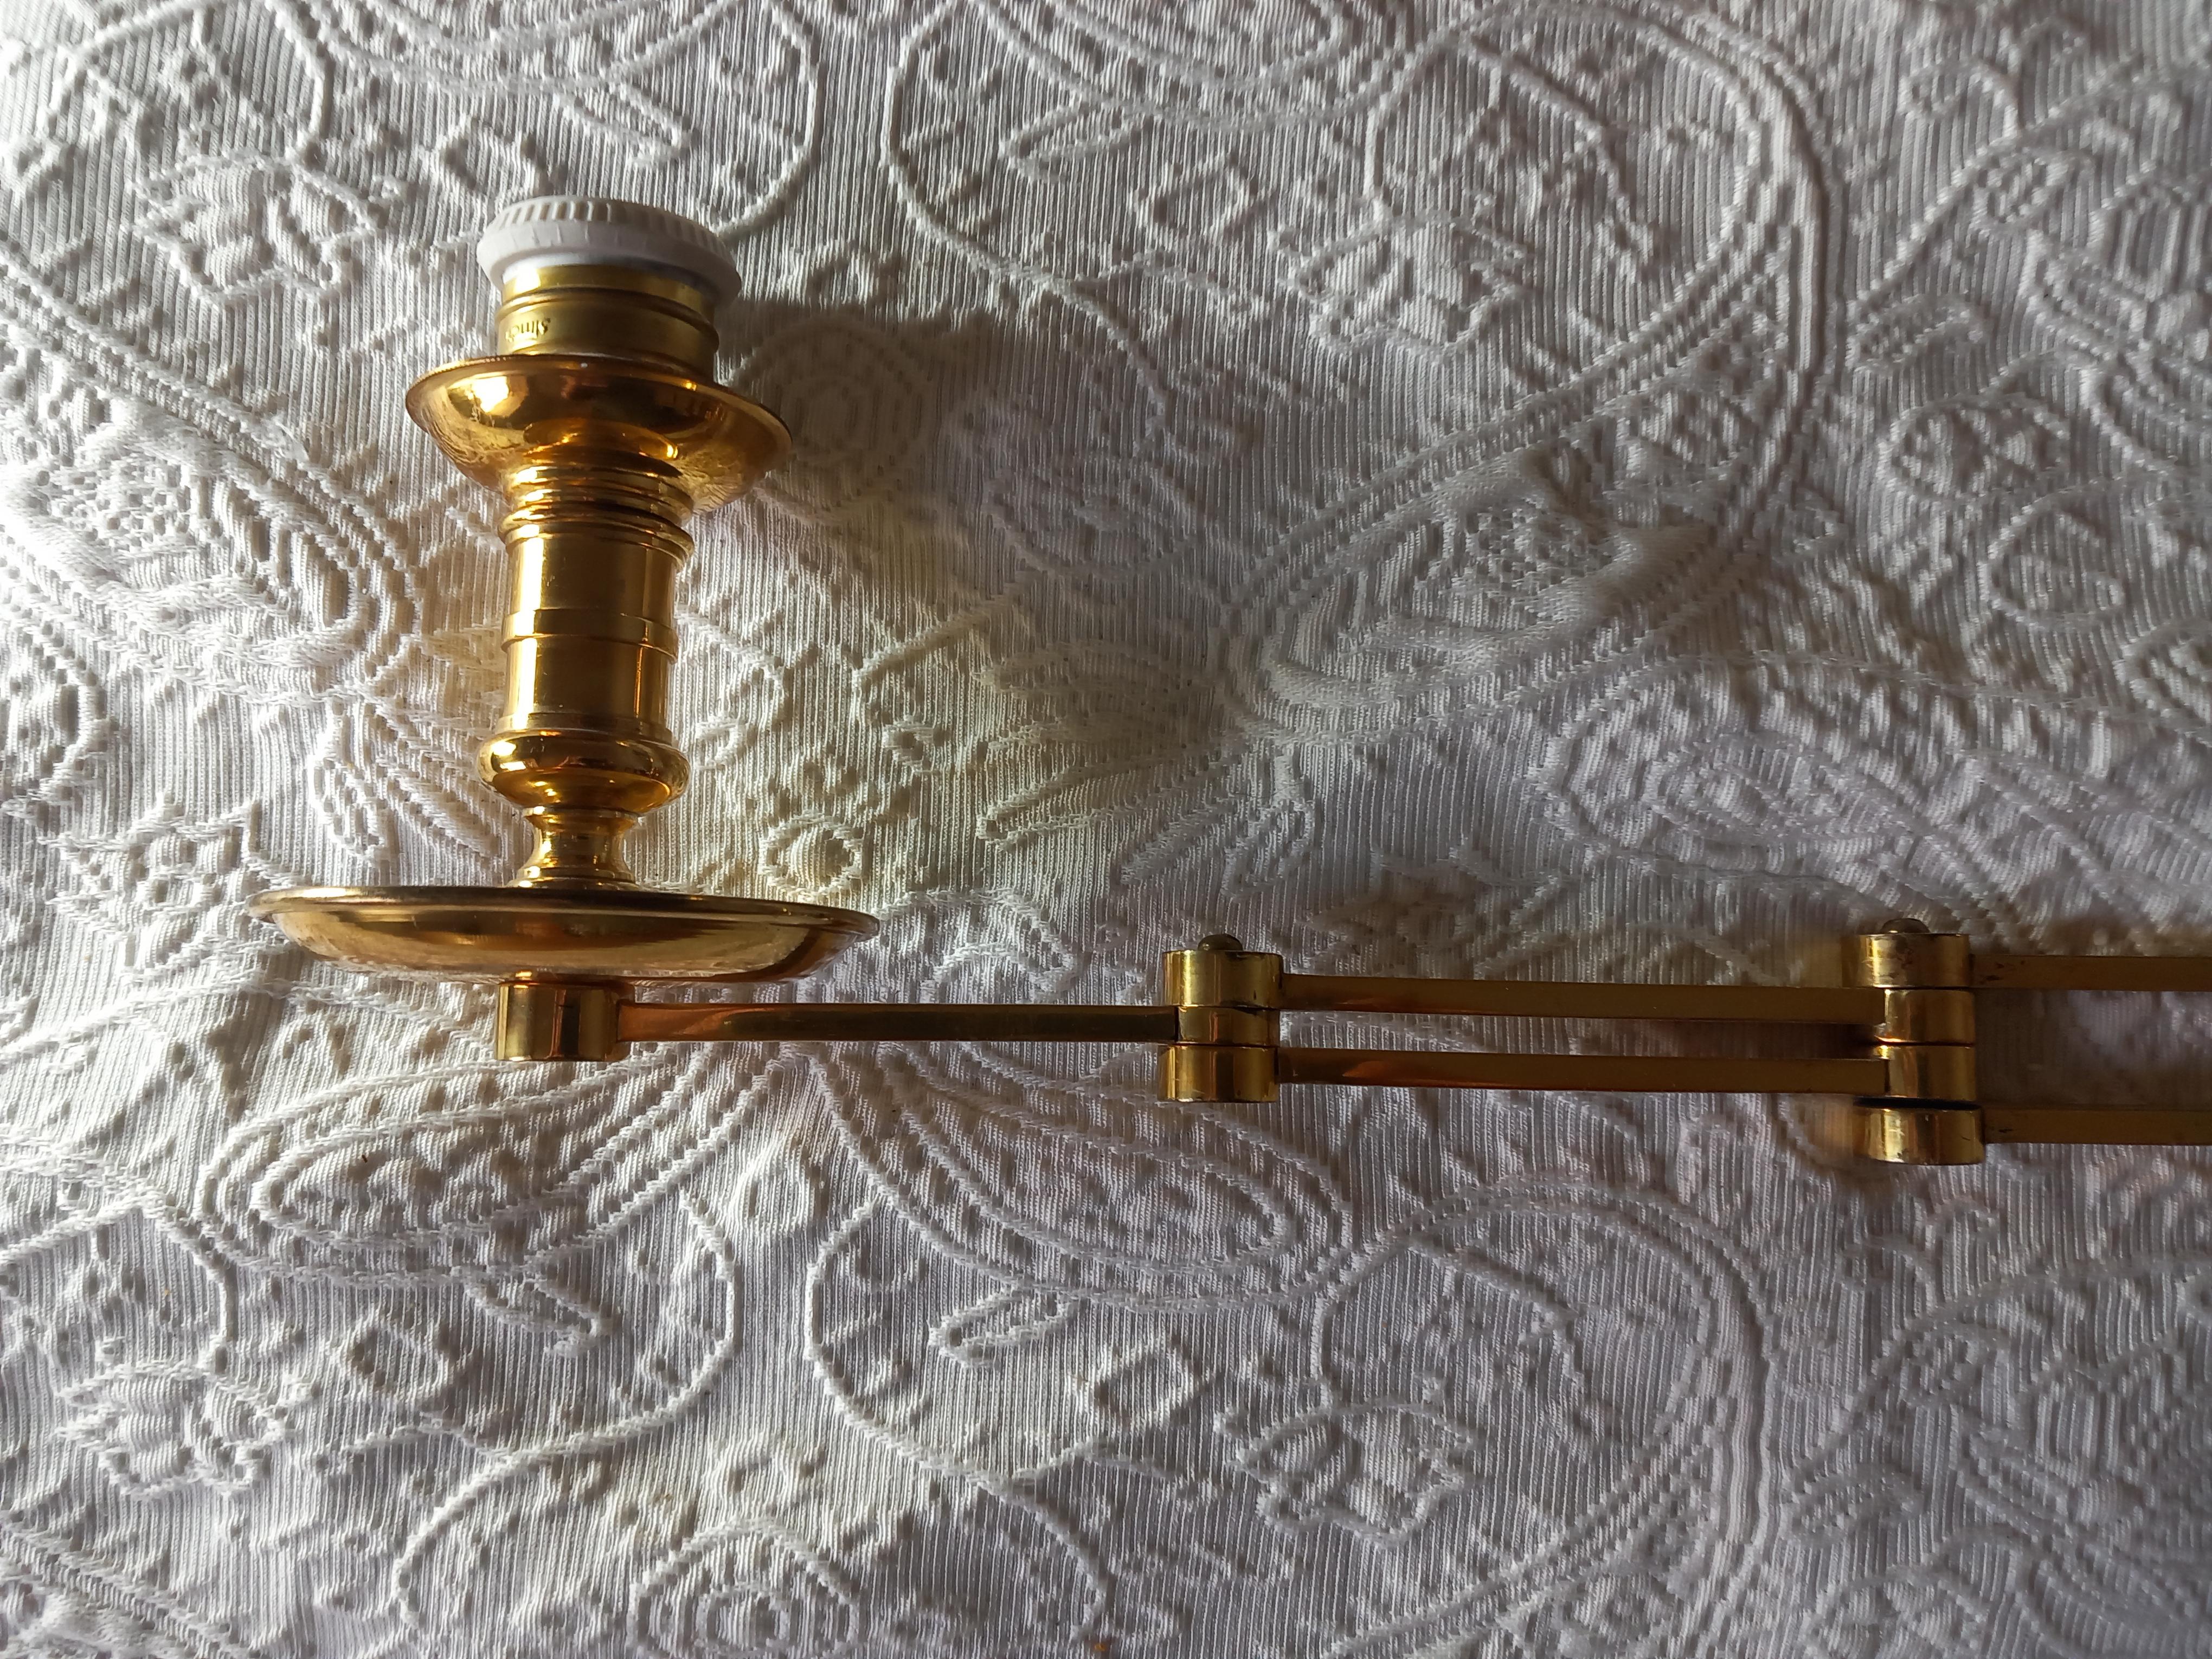  Pair of French Mison Jansen Swing Arm Sconces For Sale 3